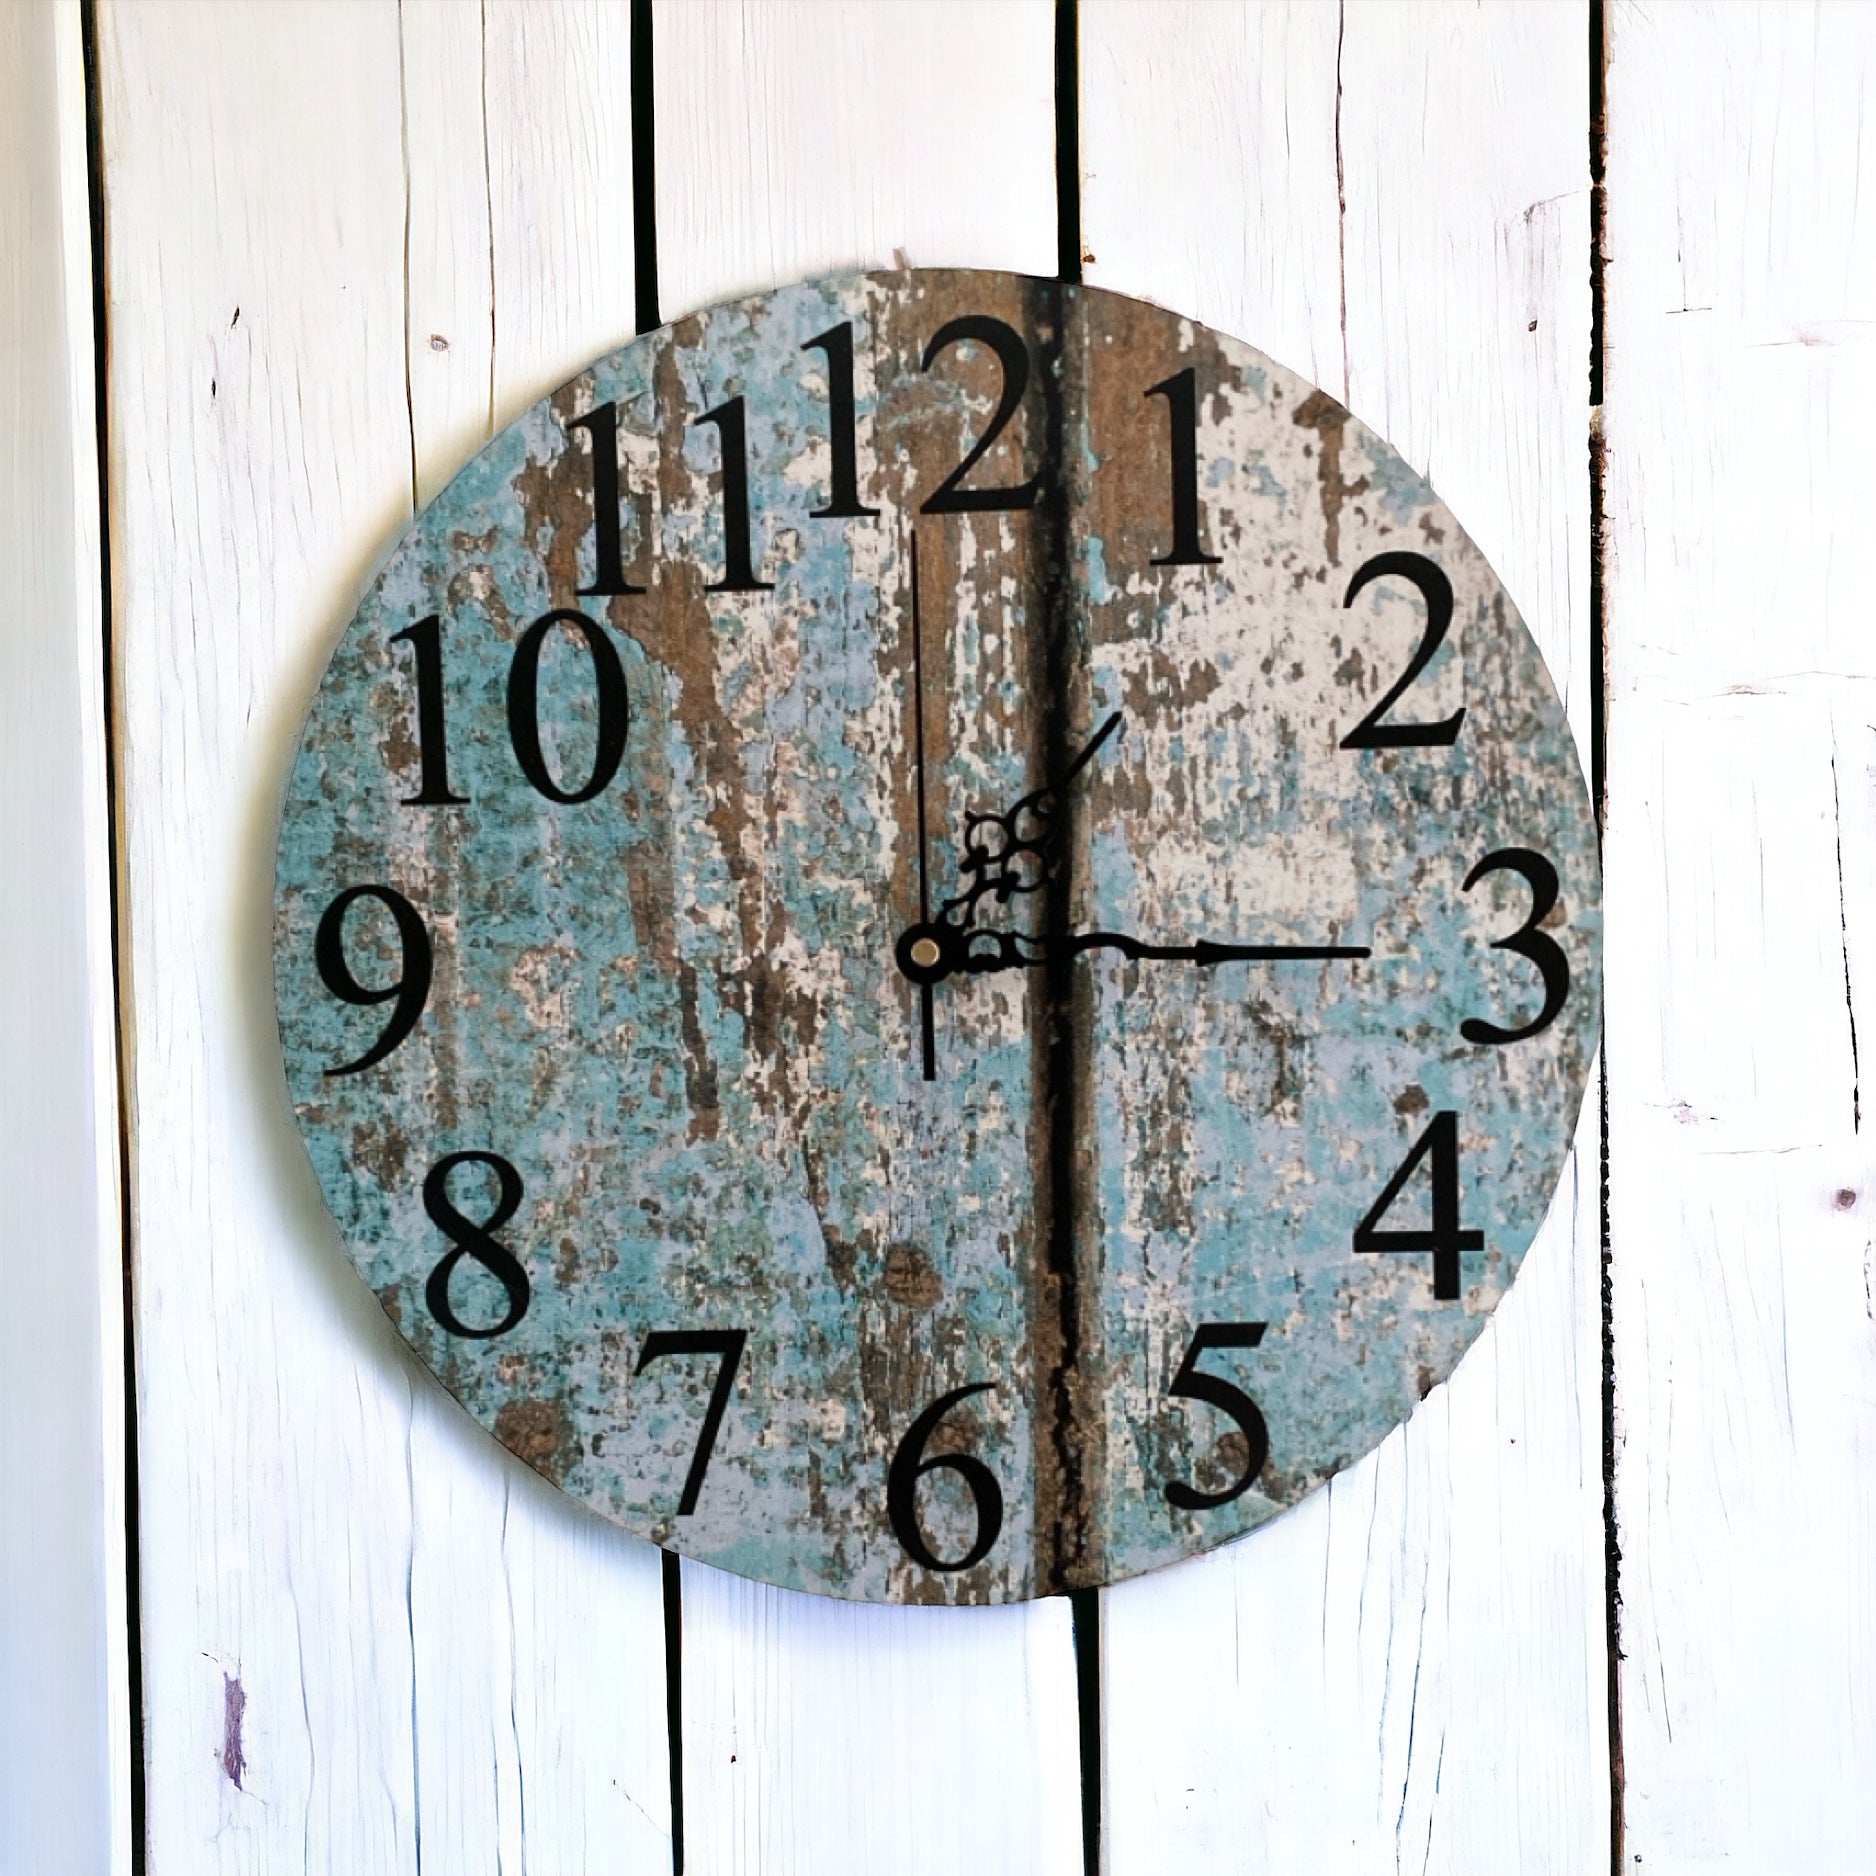 Clock Wall Rustic Aqua Blue Aussie Made - The Renmy Store Homewares & Gifts 